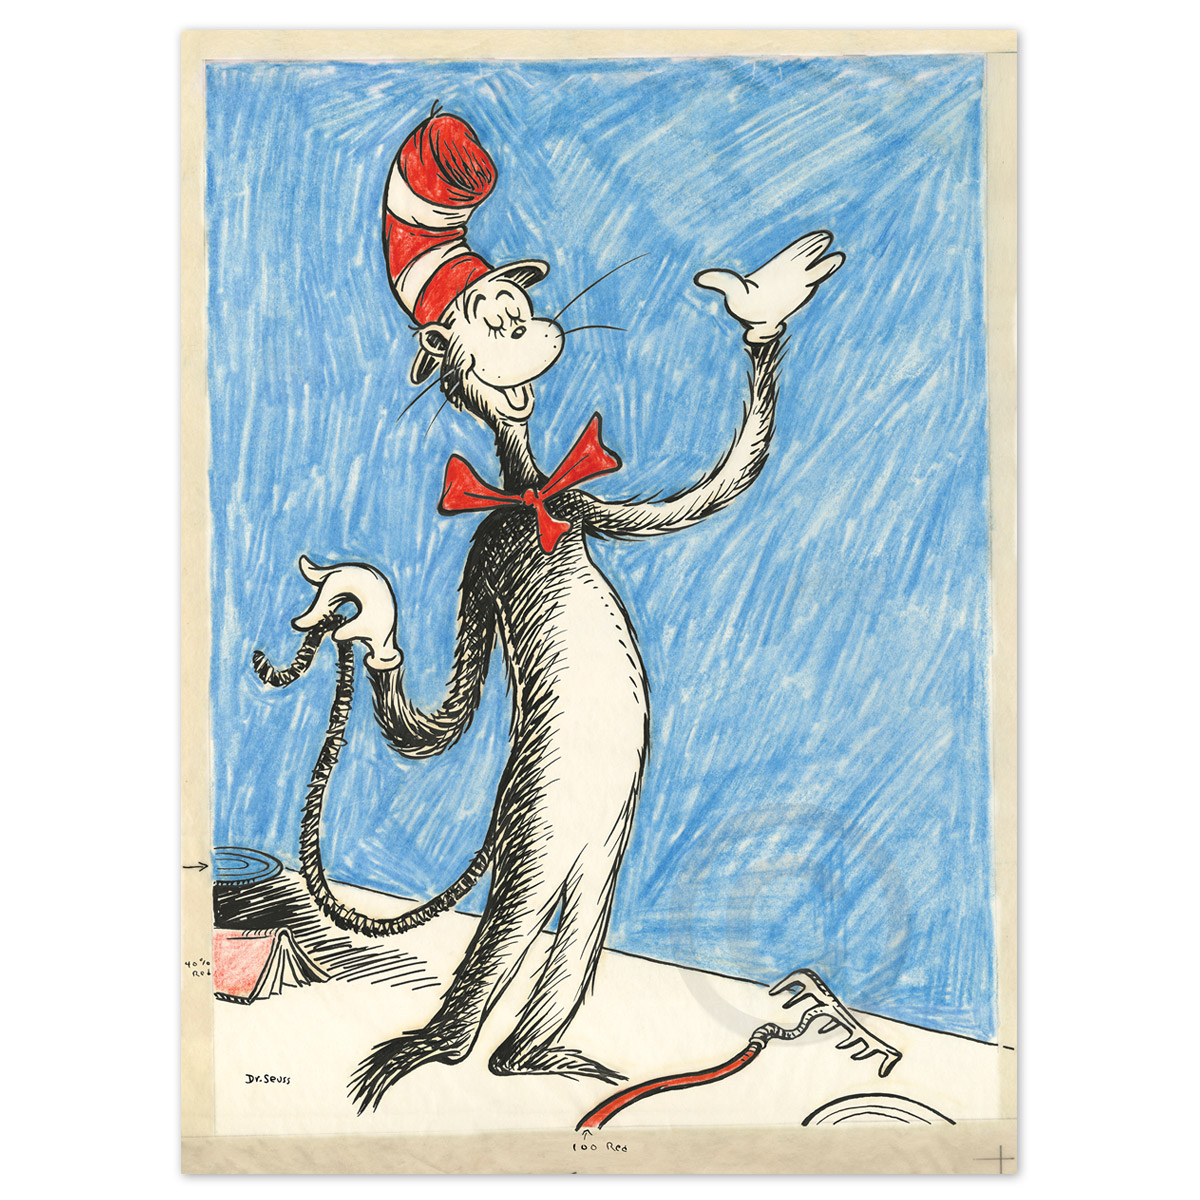 The Cat That Changed the World by Dr. Seuss